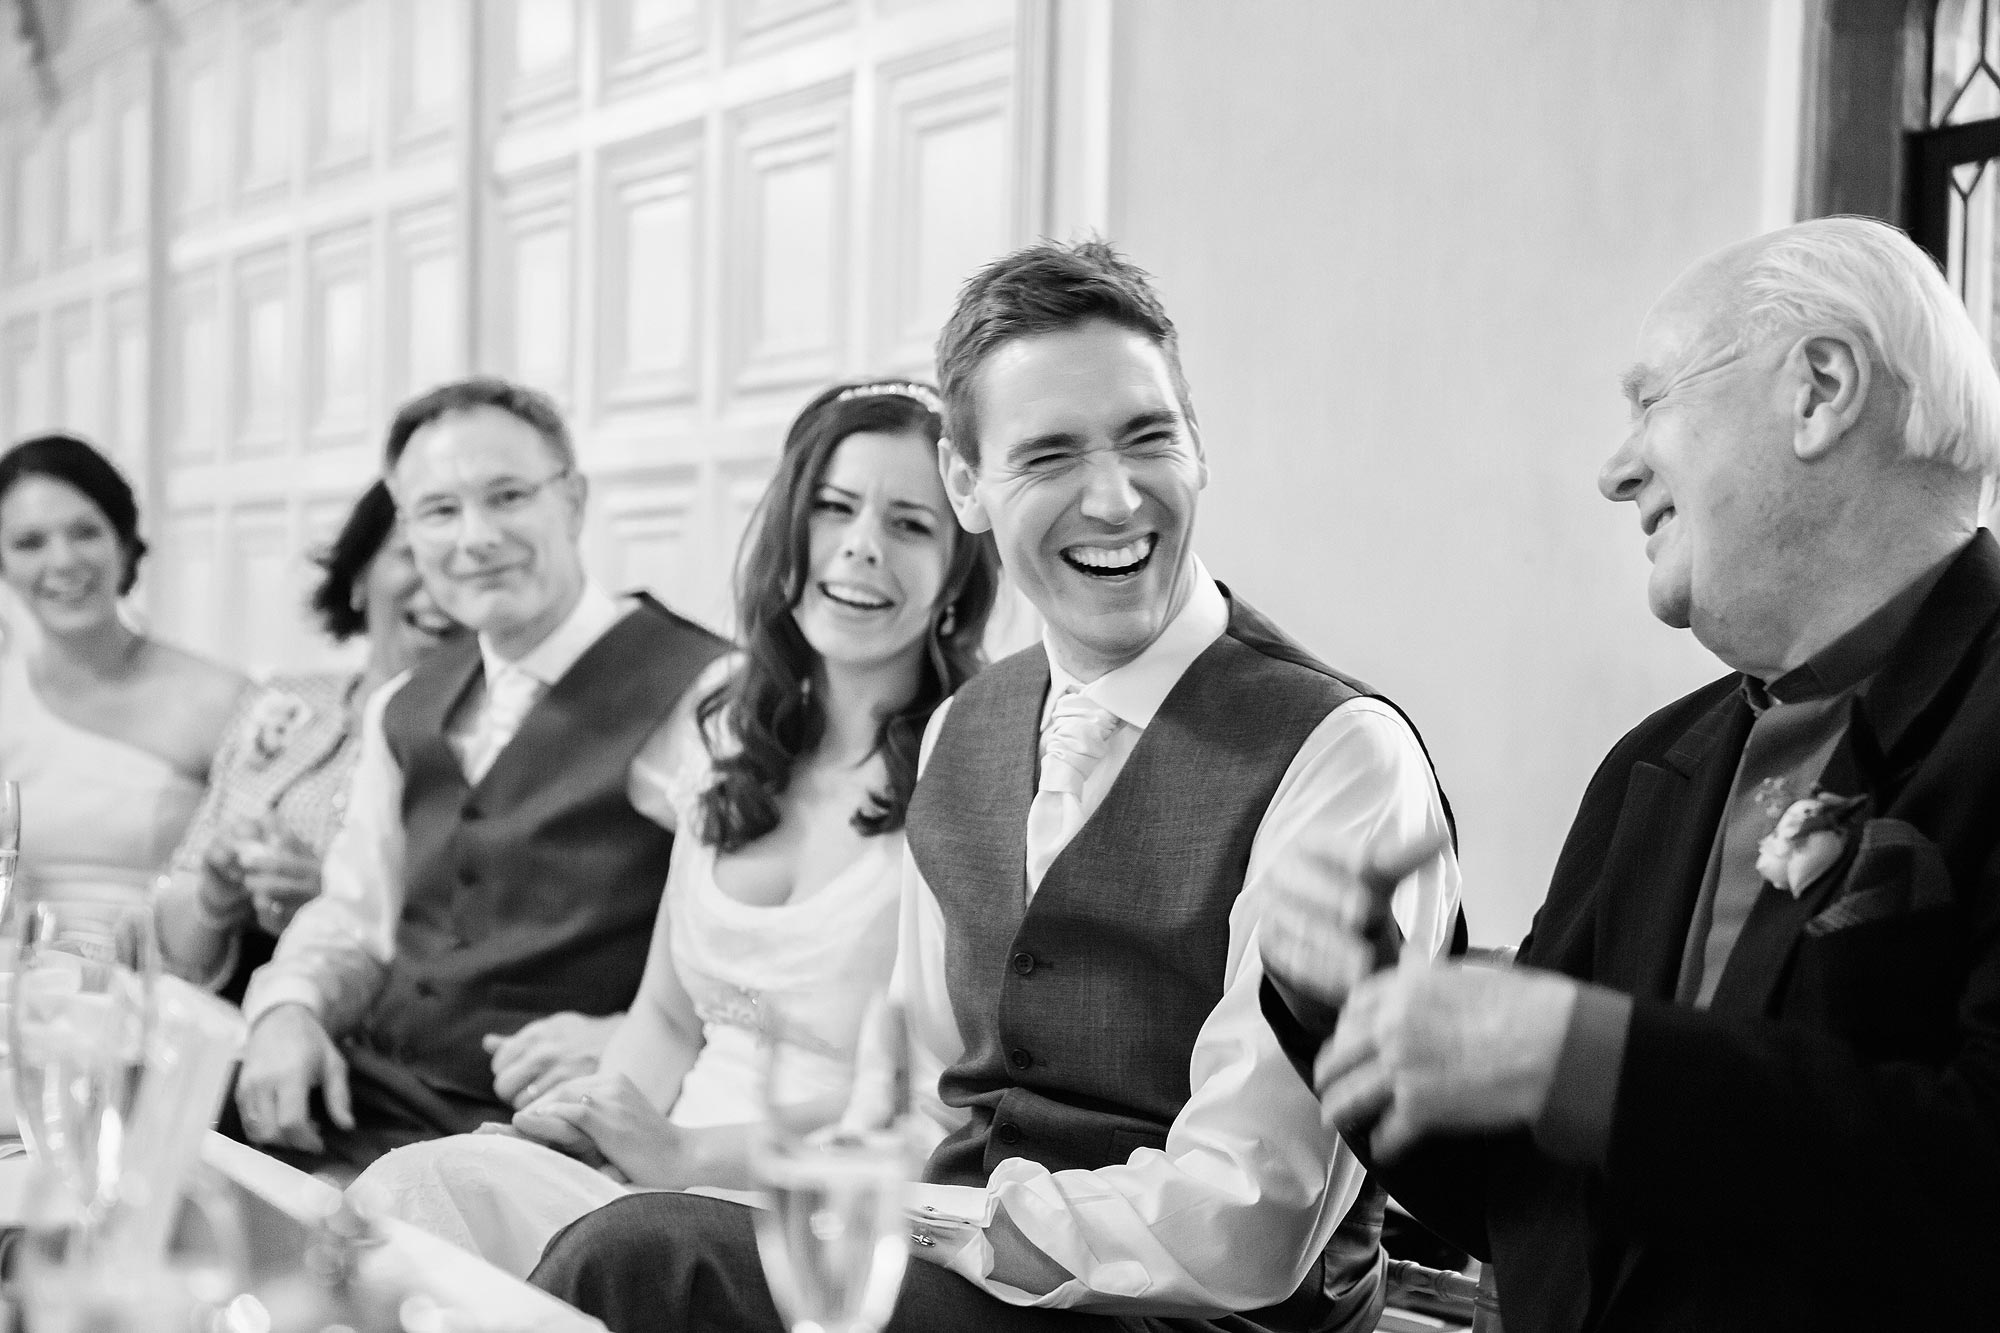 The groom laughs at his best man's speech